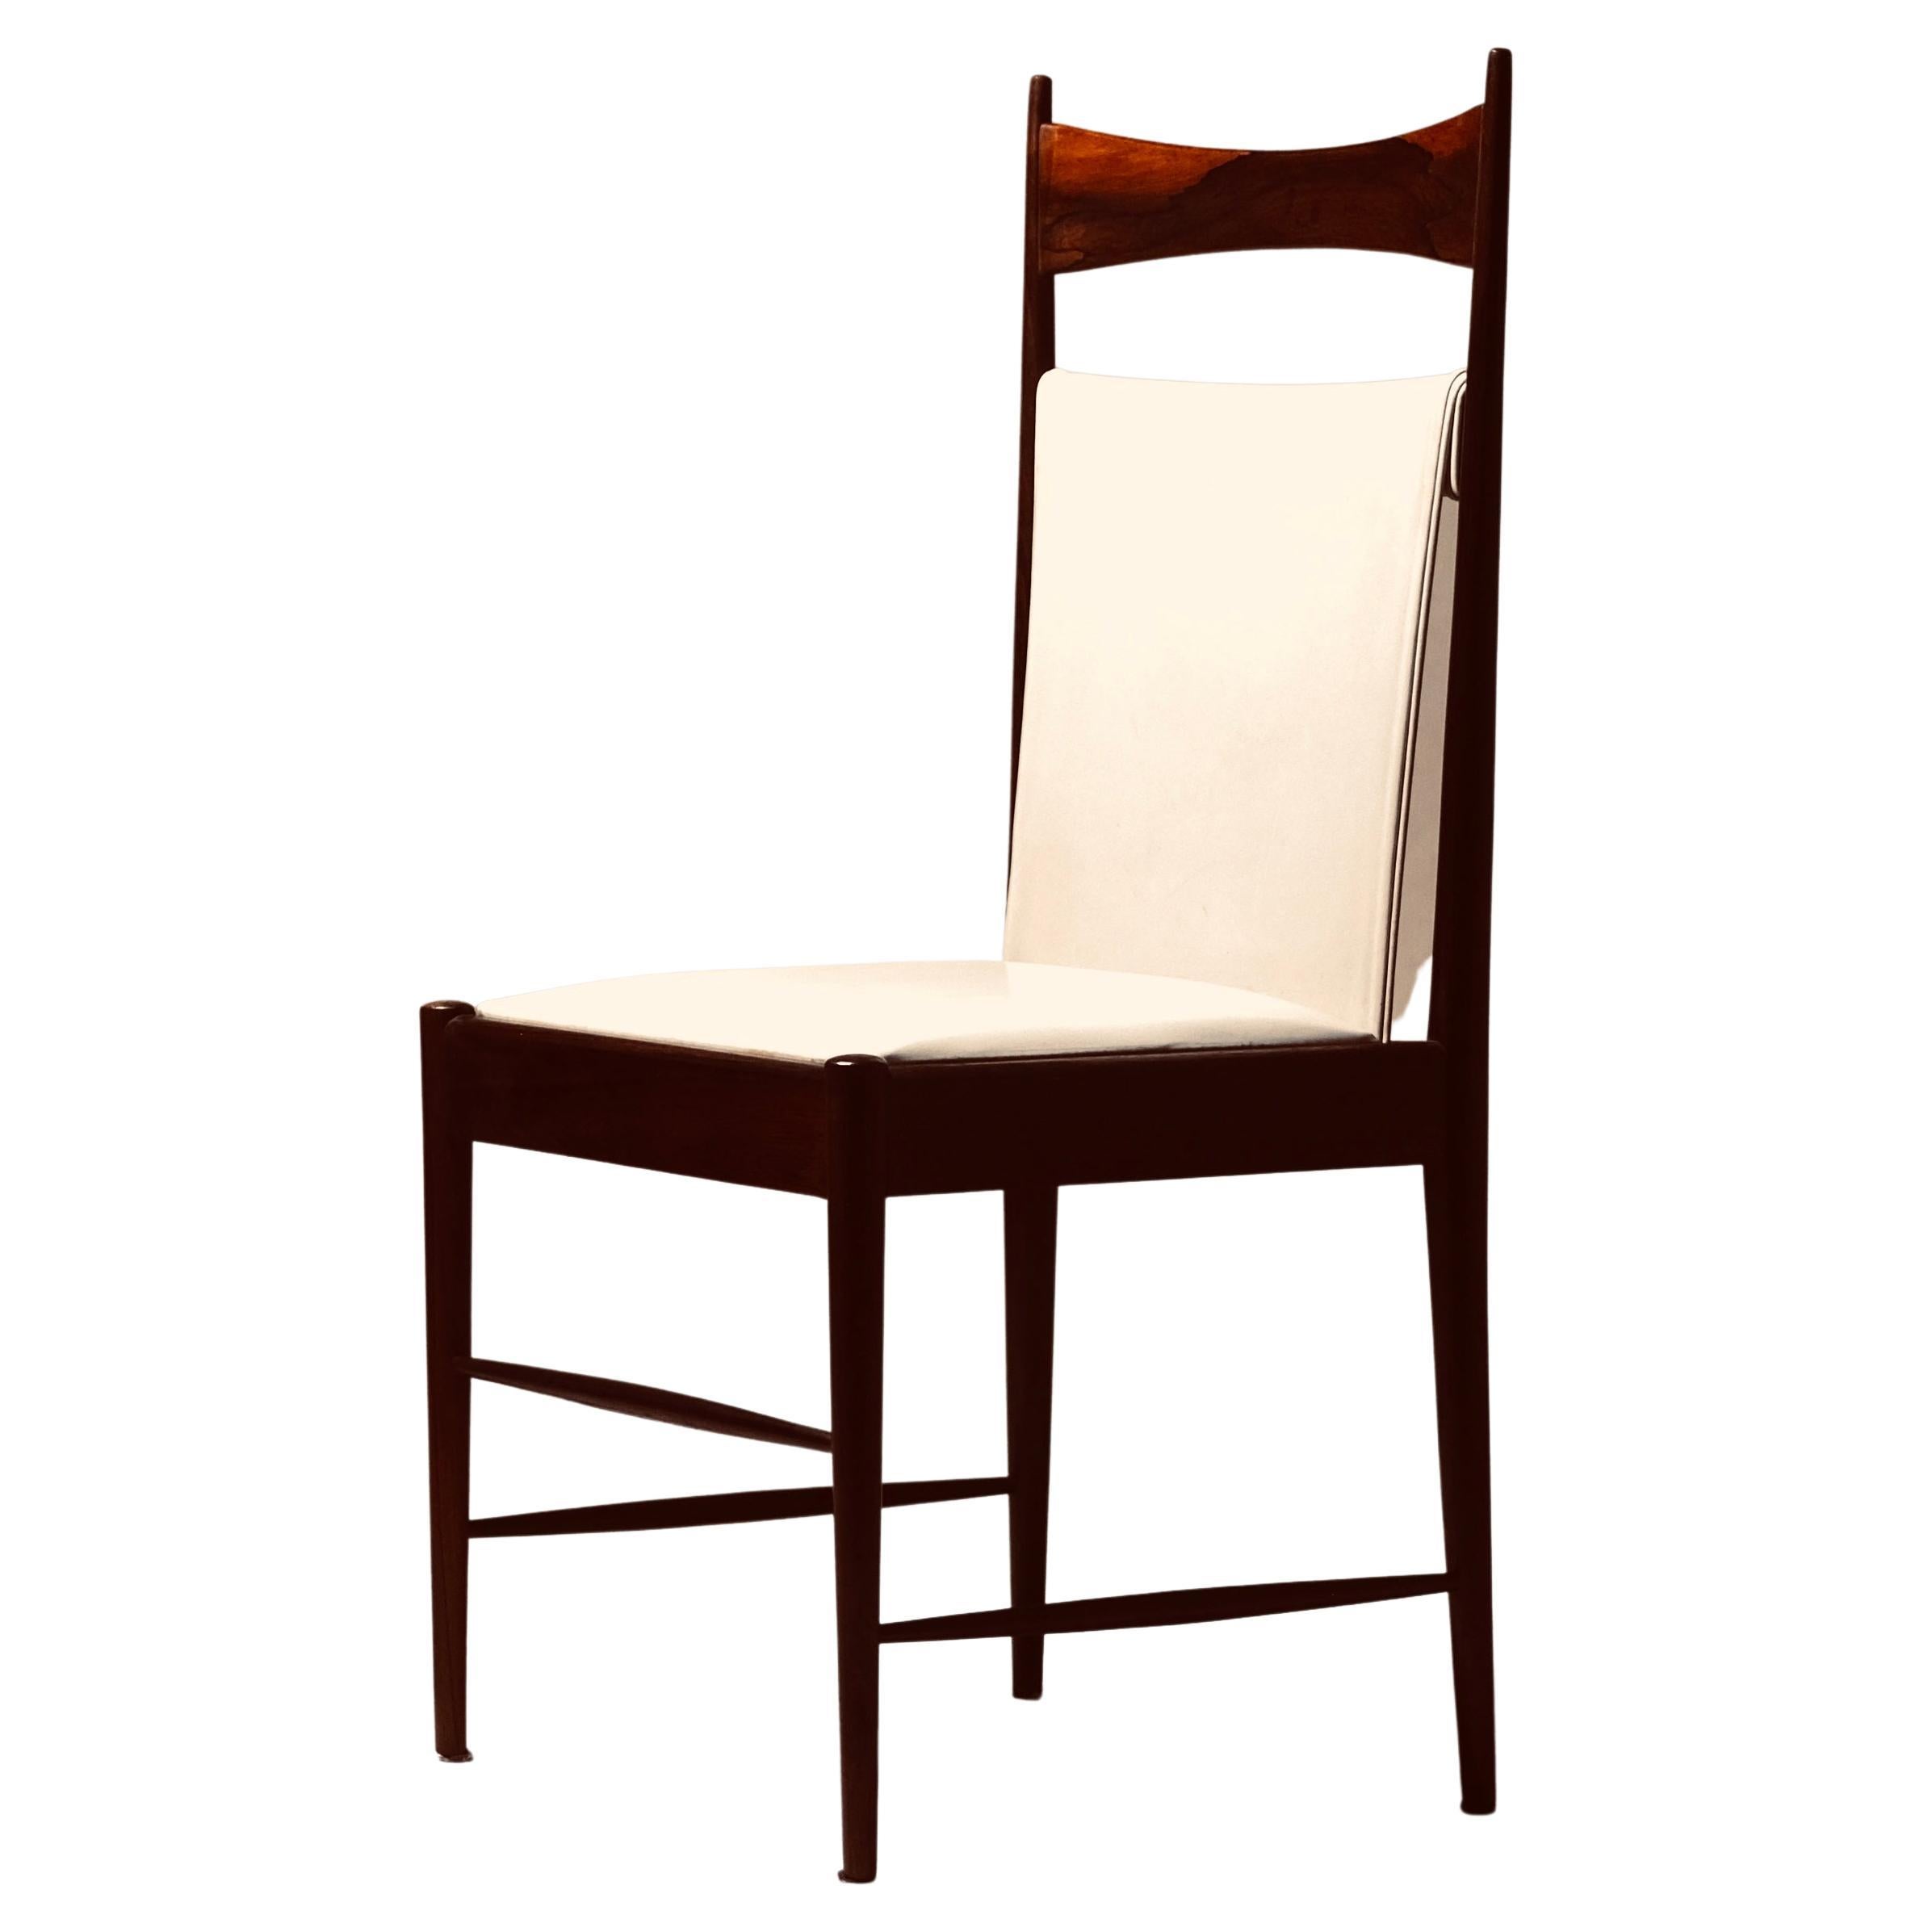 Set of 8 Sergio Rodrigues High-Back 'Cantu' Dining Chairs For Sale